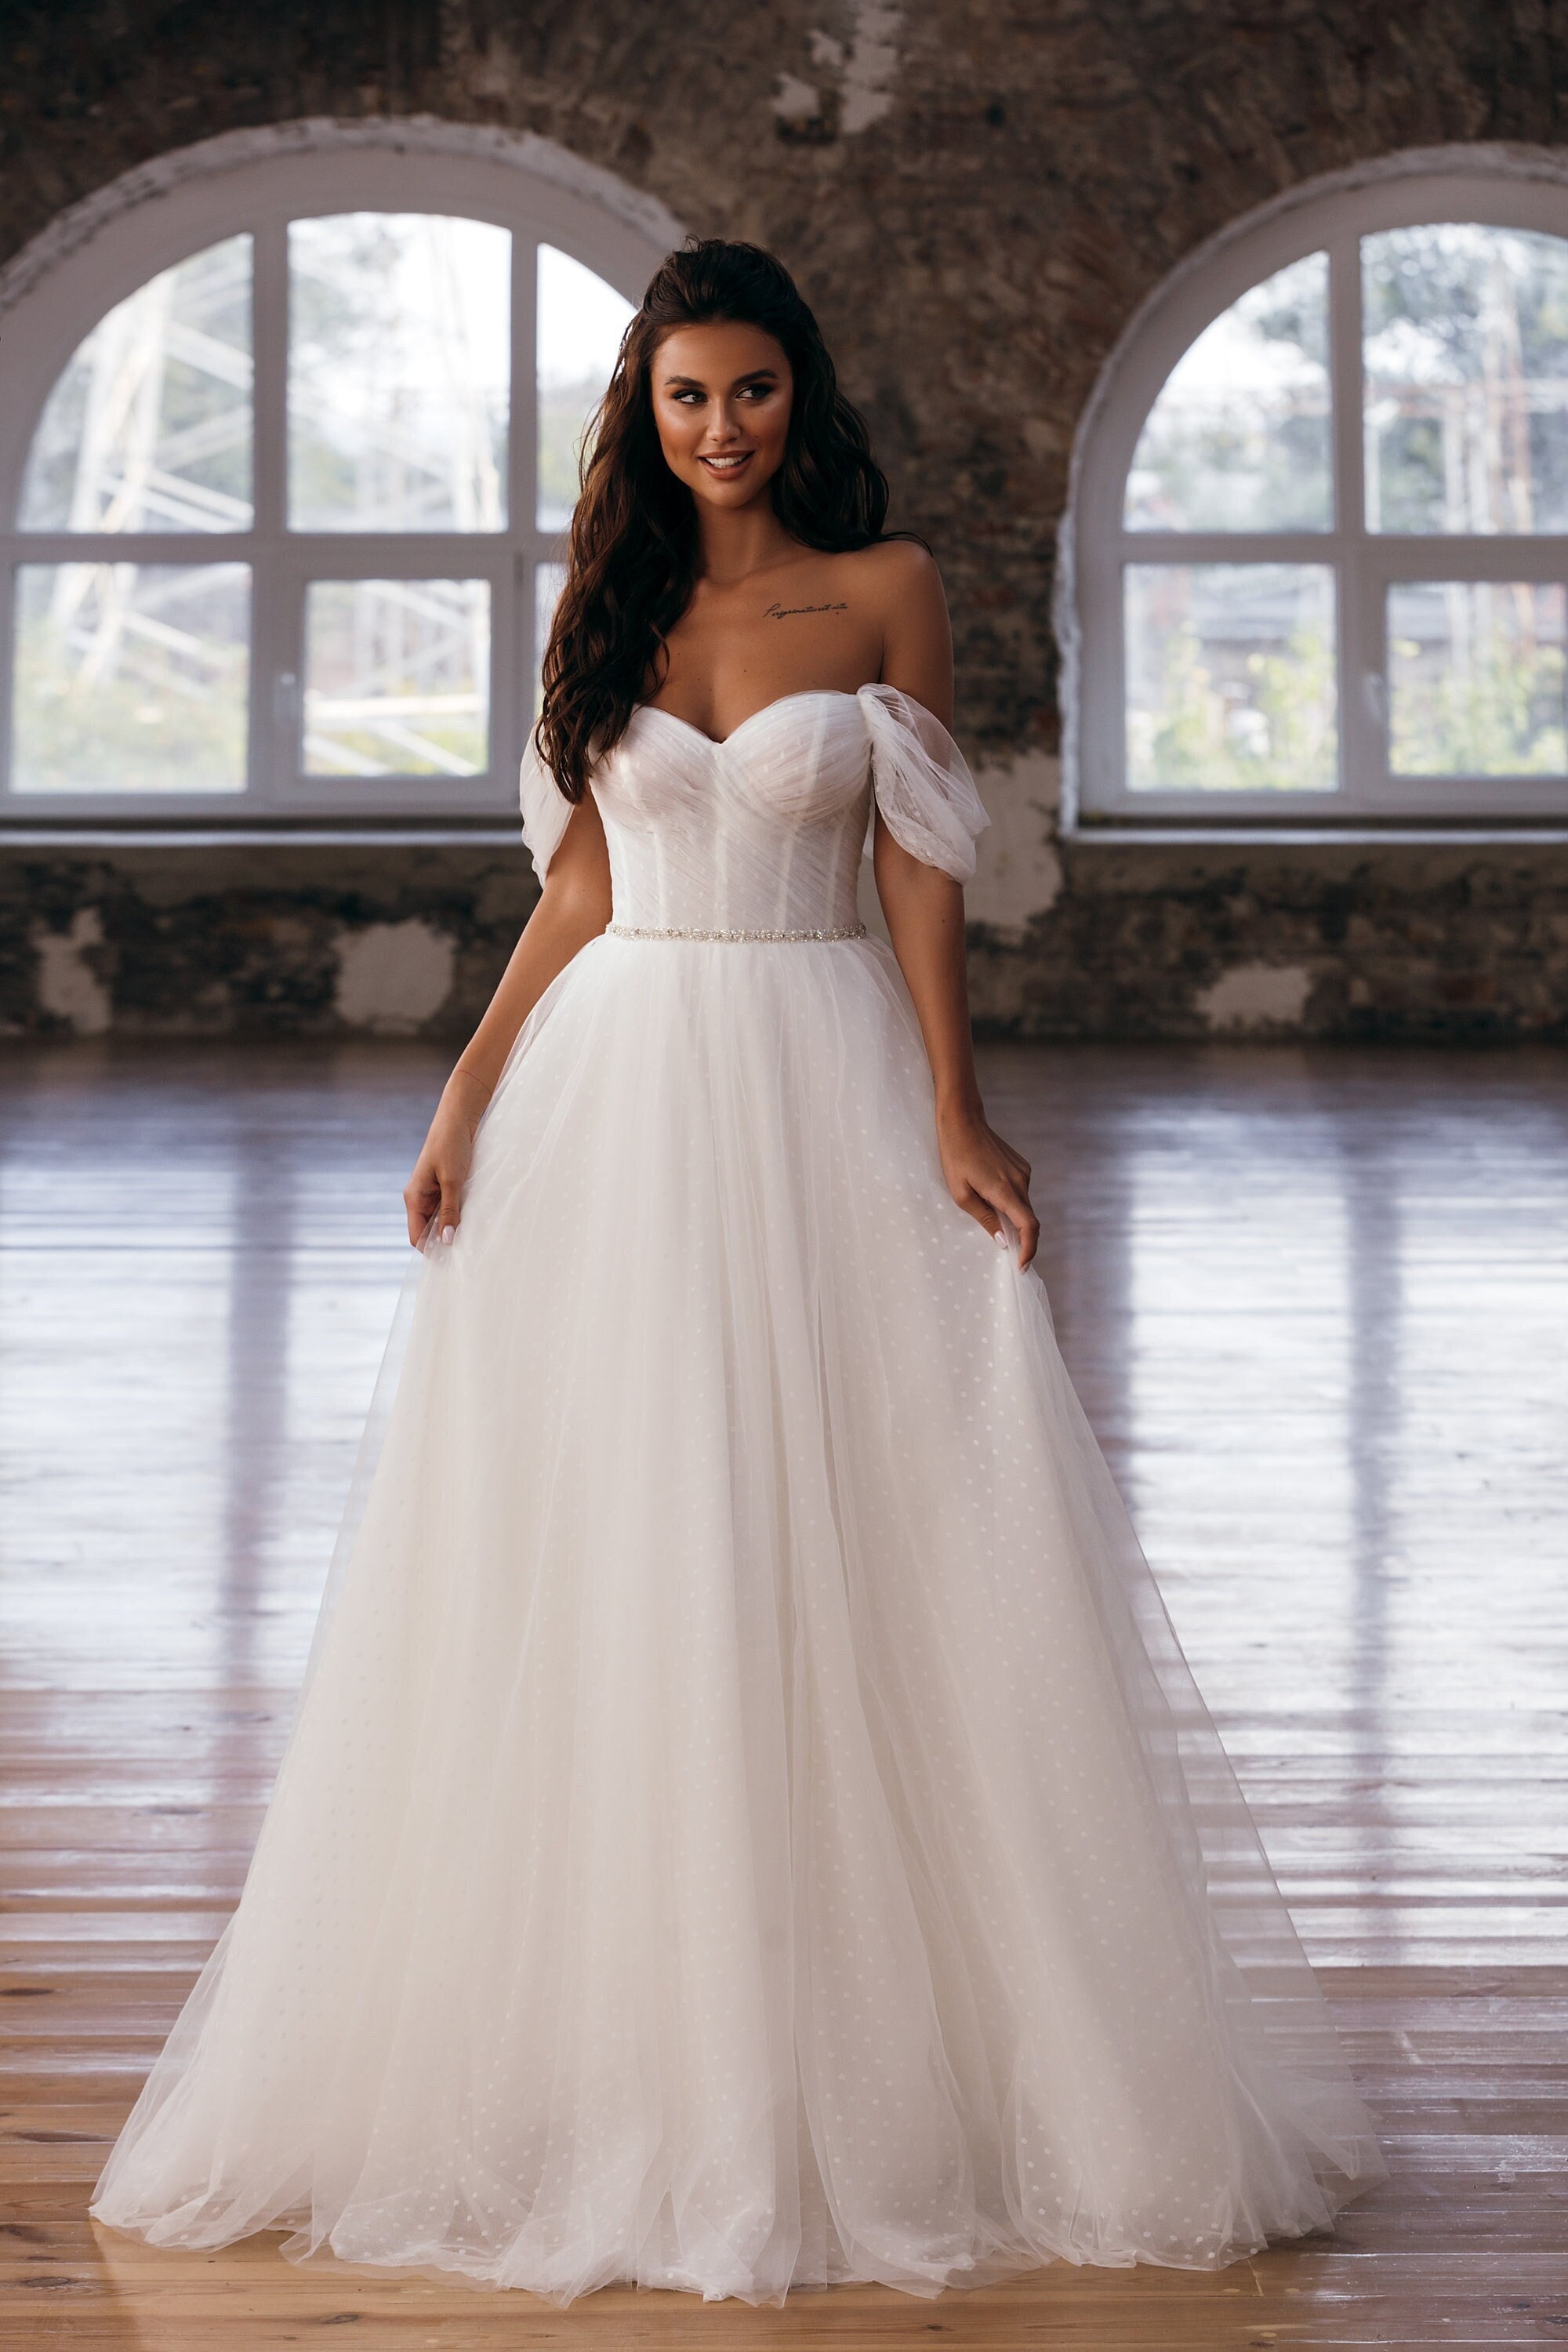 A-line Wedding Dress with Off The Shoulder Sleeves, Tulle Wedding Dress,  Ruched Bodice with Beaded Waistband, Modern Romantic Bridal Gown